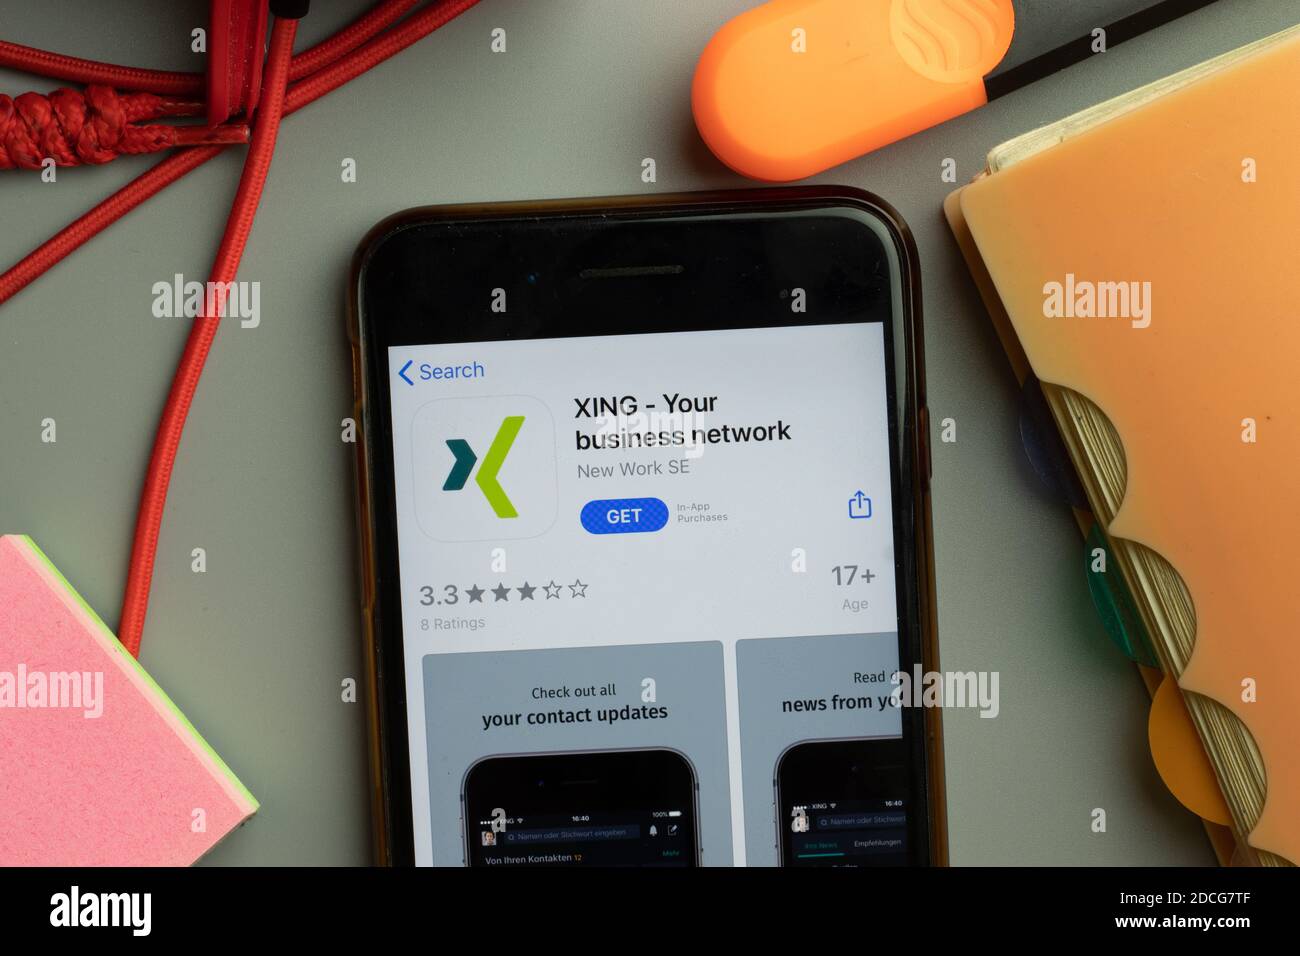 New York, United States - 7 November 2020: XING Business Network app store logo on phone screen, Illustrative Editorial. Stock Photo